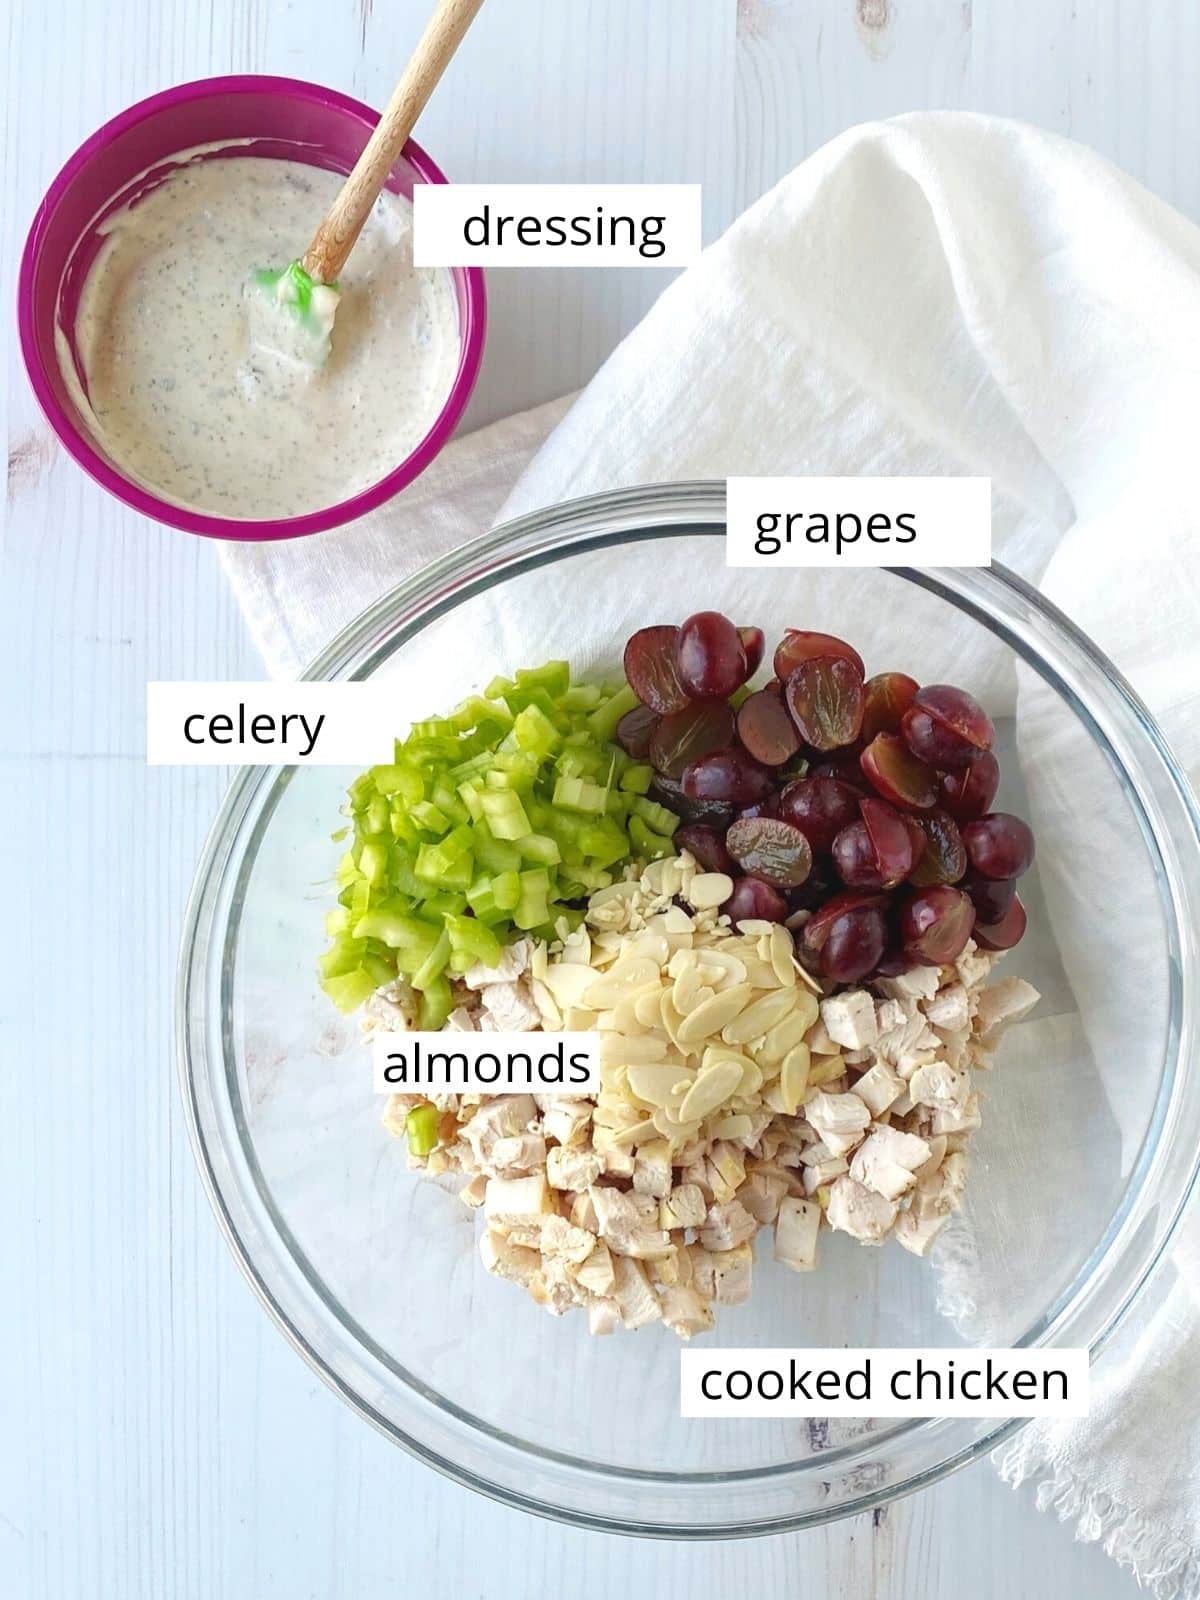 bowl of ingredients - chicken, grapes, celery, almonds, and a small bowl of dressing